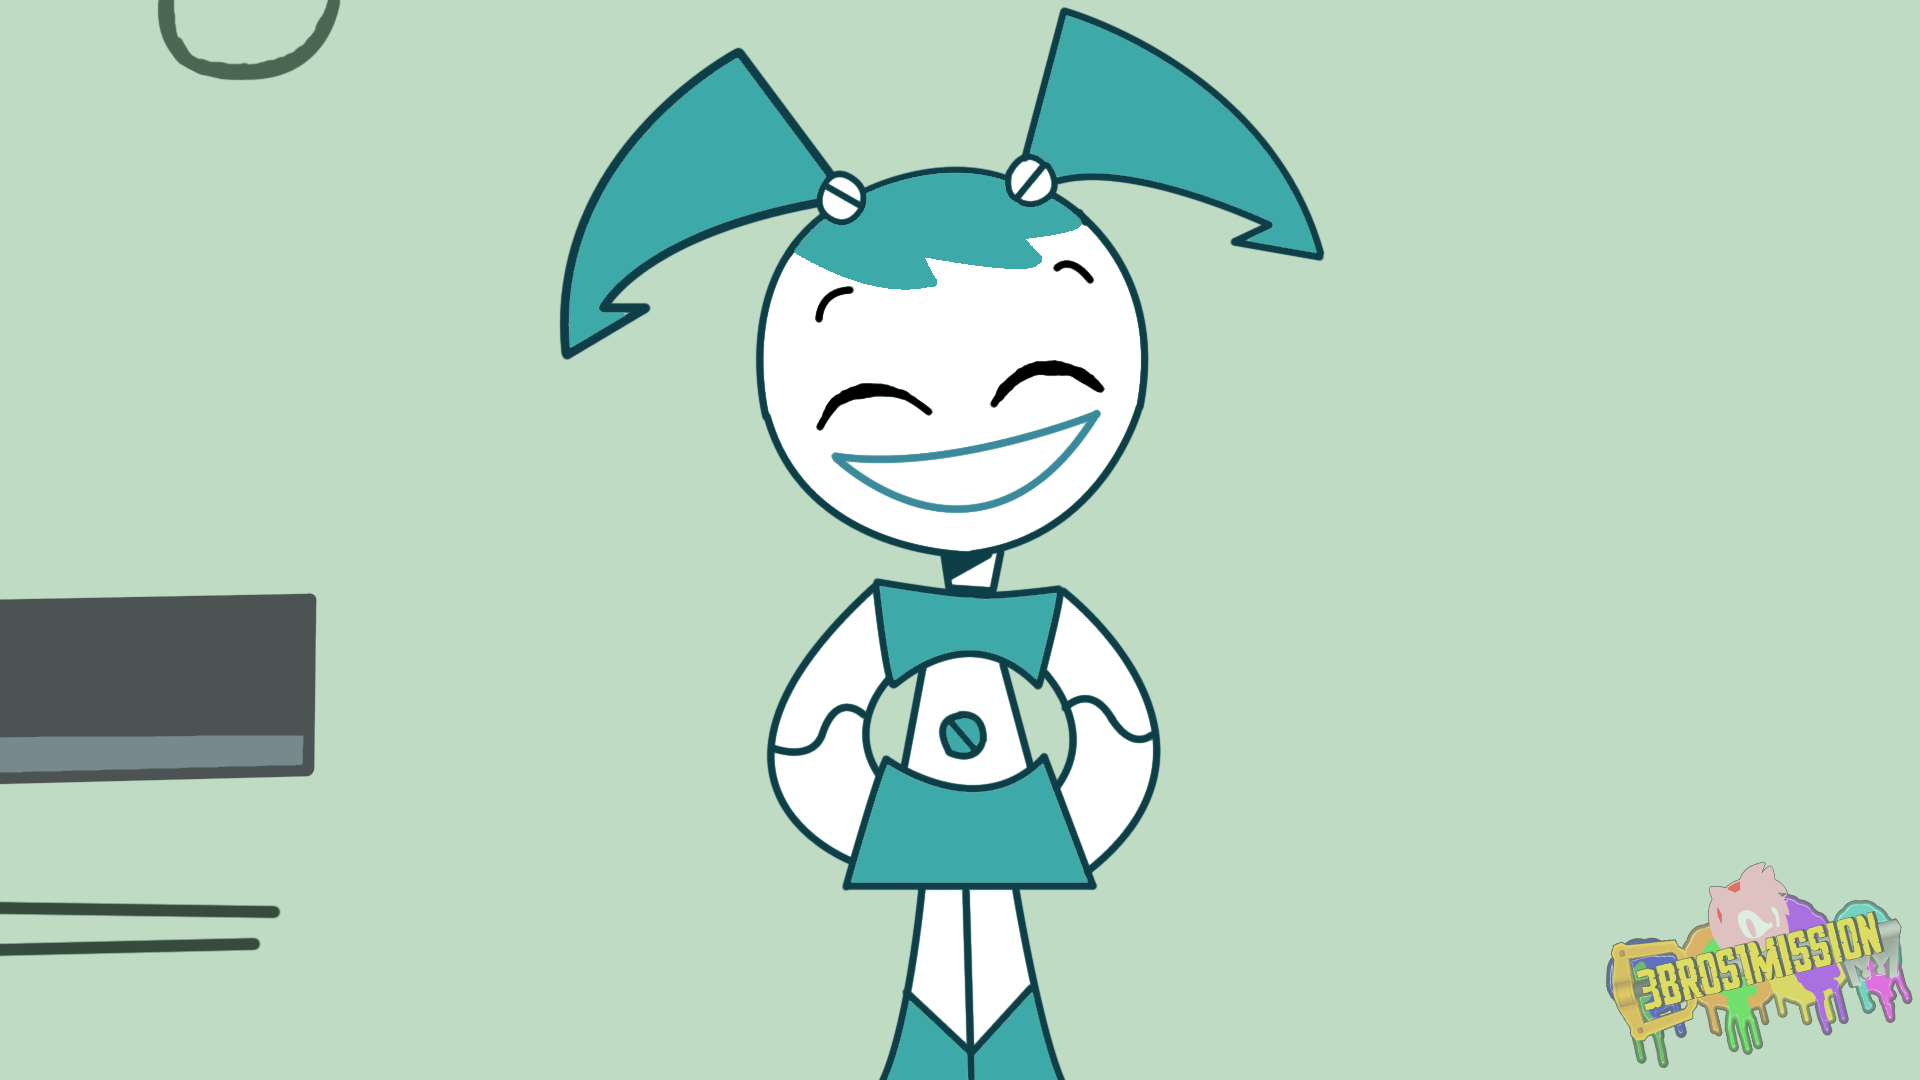 My Life As A Teenage Robot Backgrounds, Compatible - PC, Mobile, Gadgets| 1920x1080 px